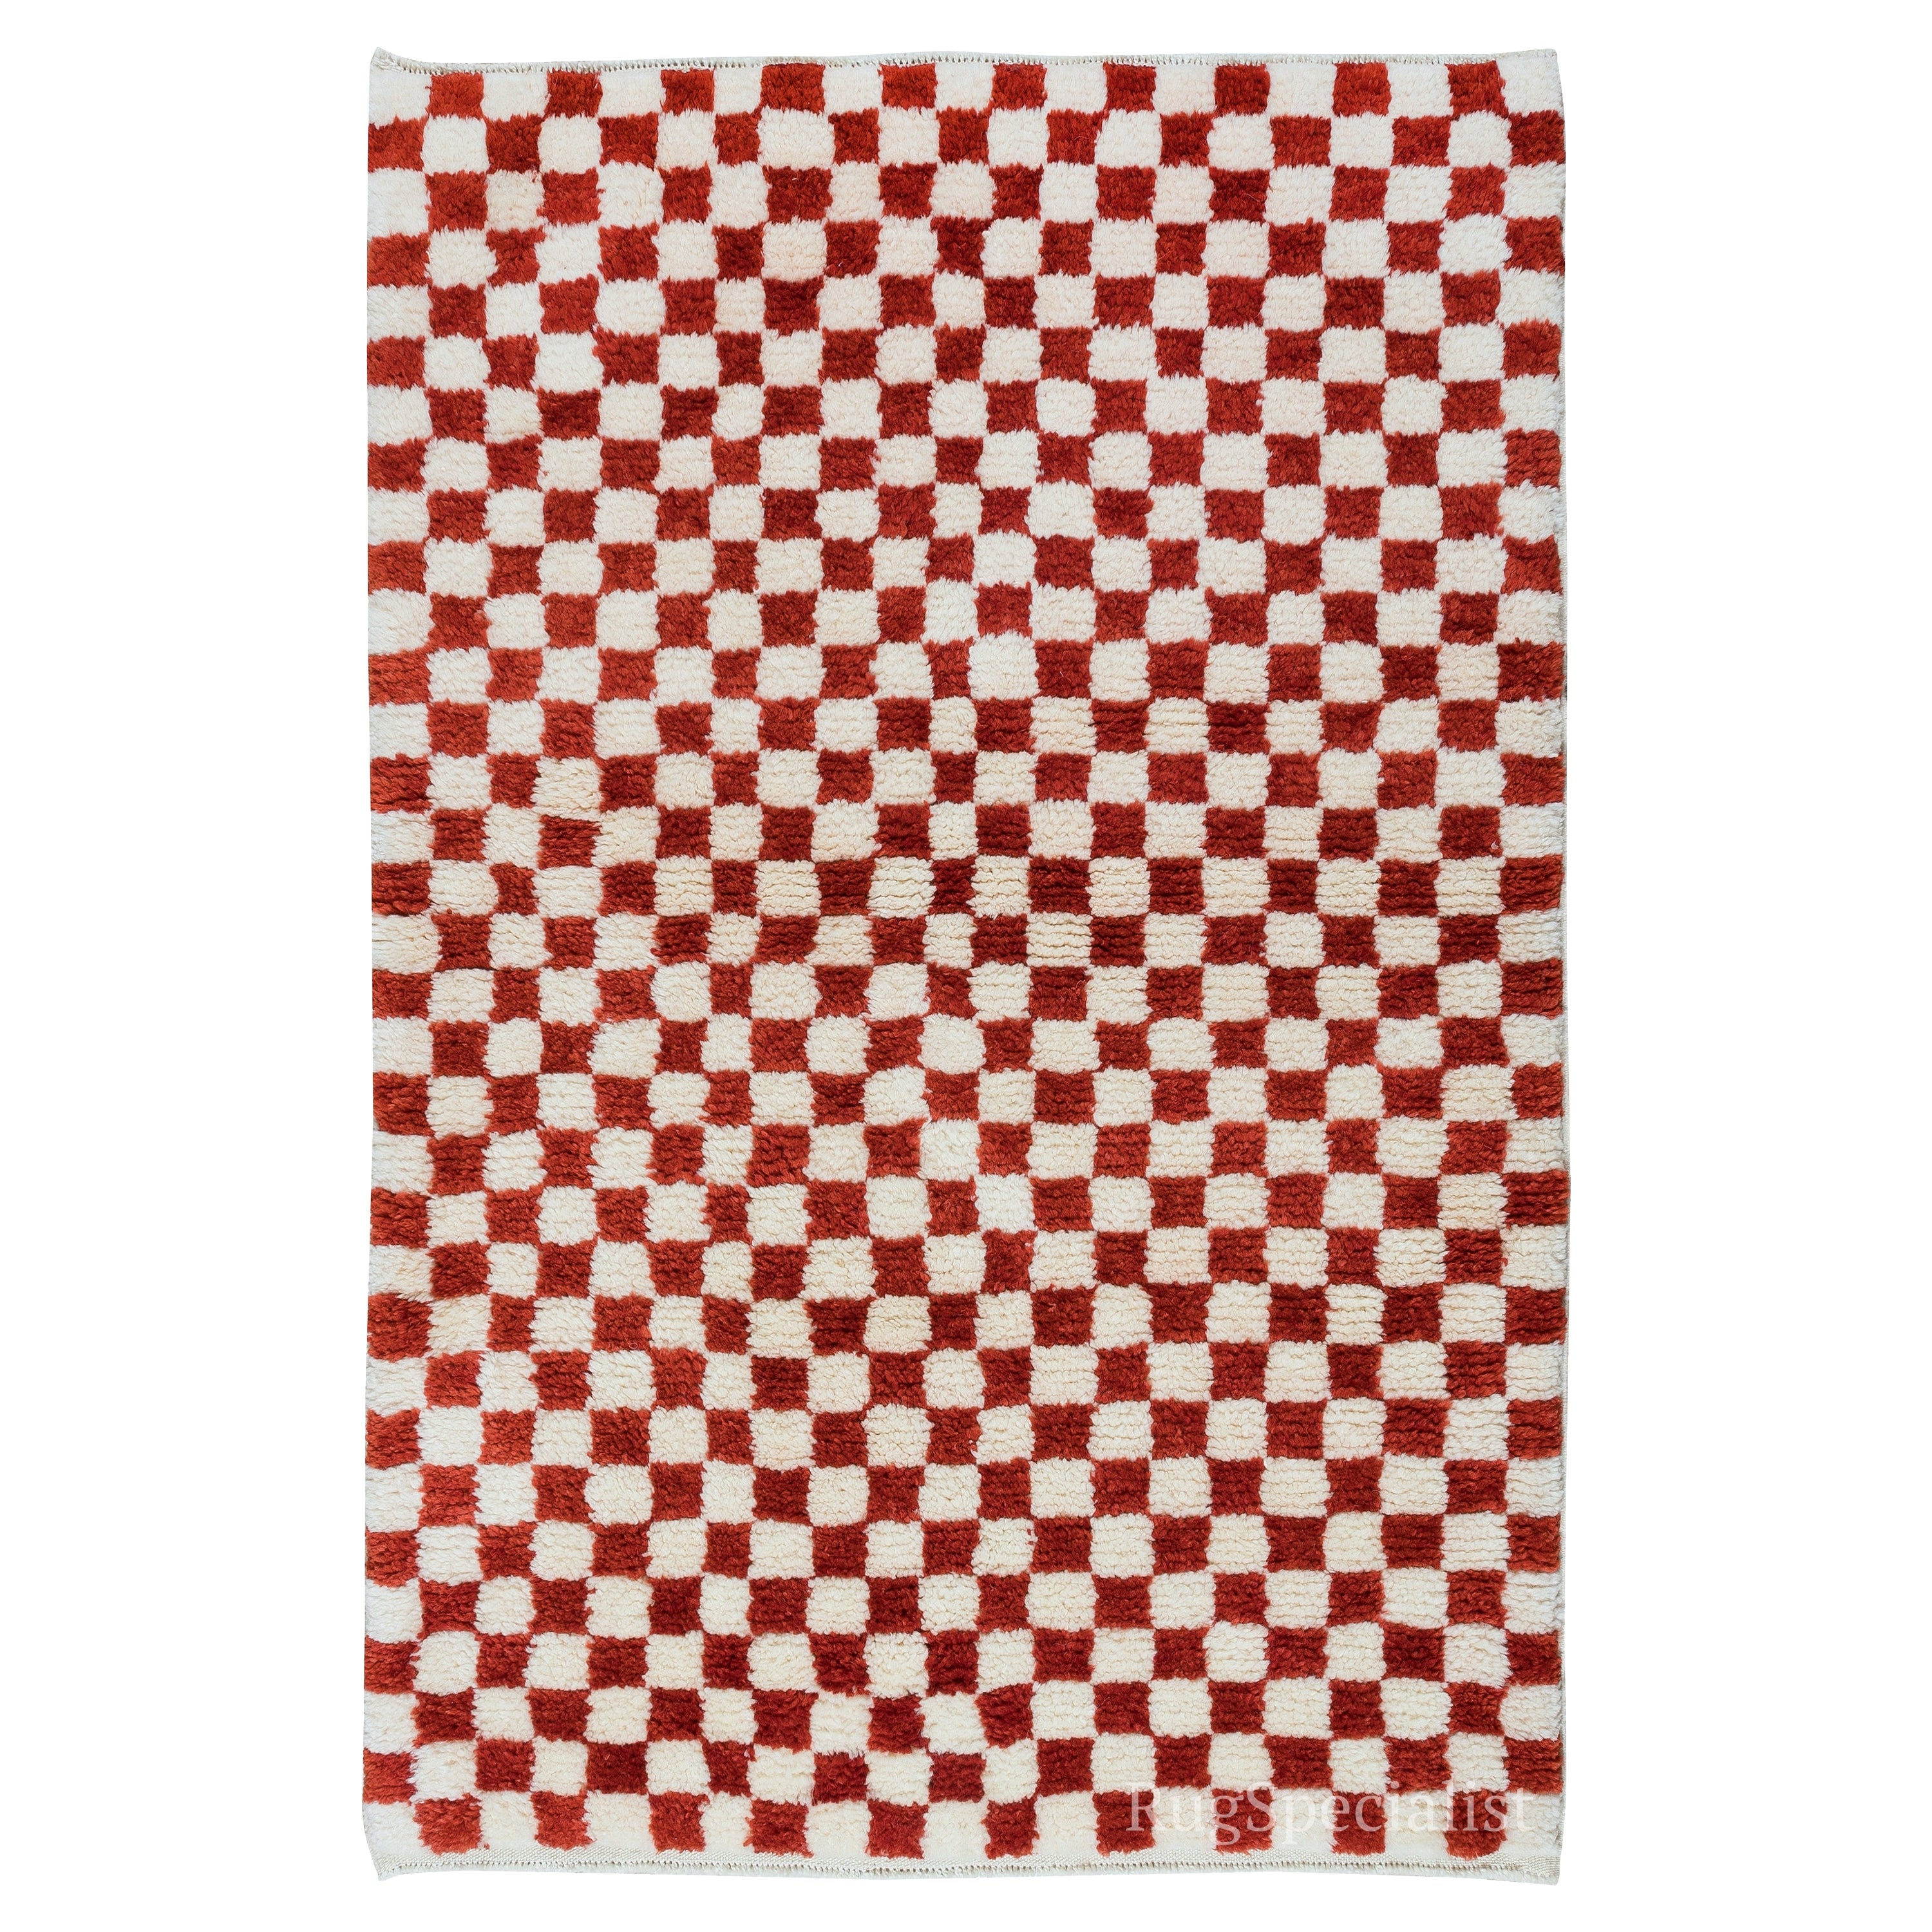 Custom Handmade Checkered Design Tulu Rug in Red, Ivory. All Soft, Cozy Wool For Sale